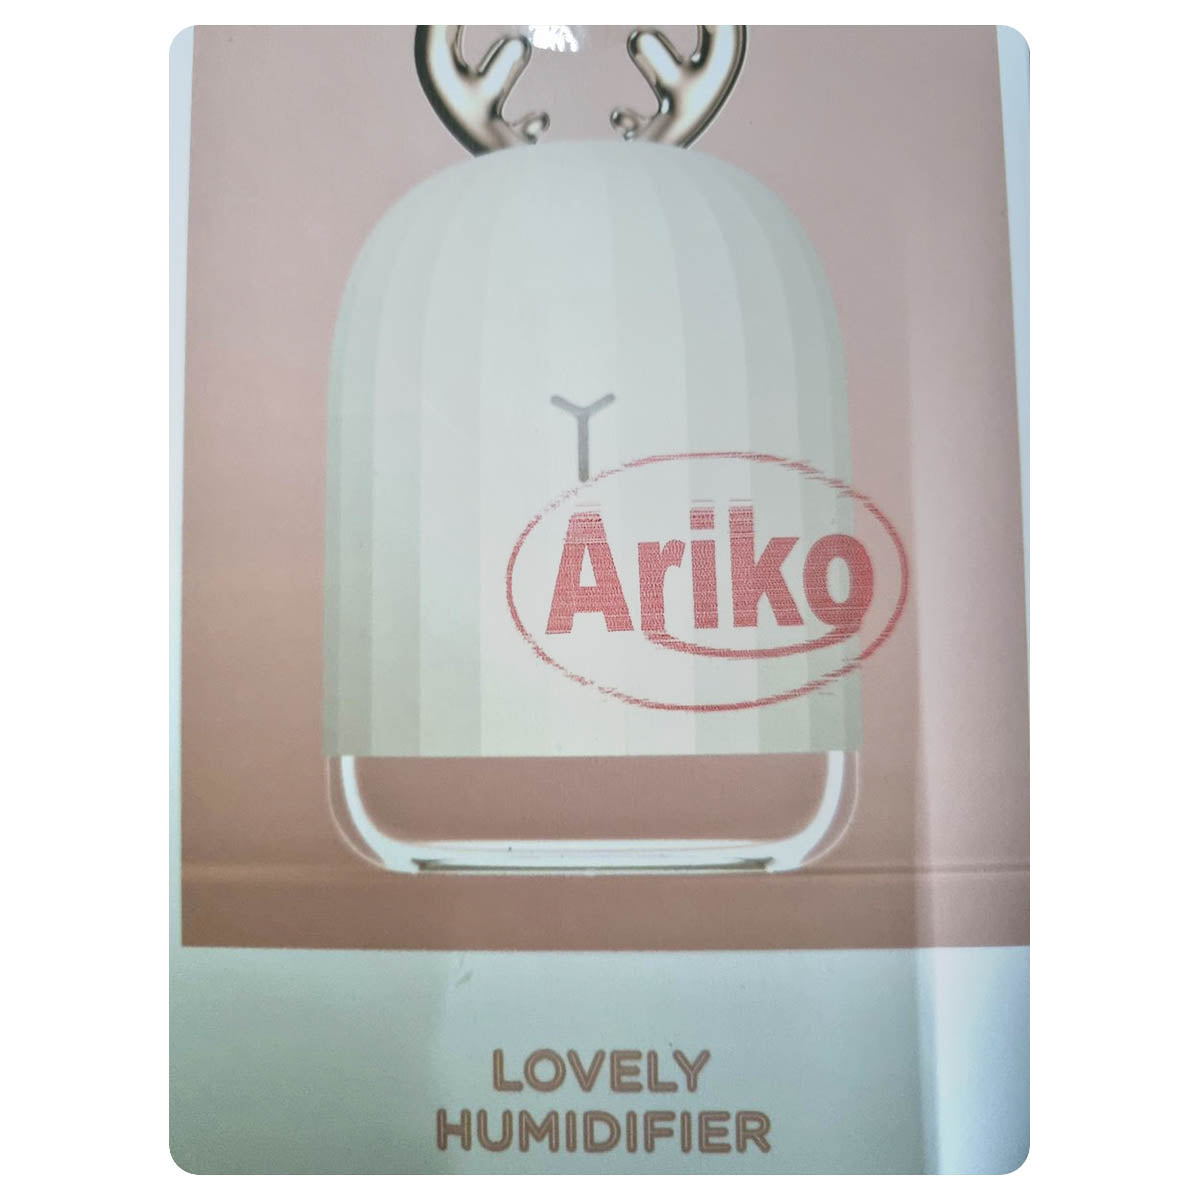 <tc>Ariko</tc> Air humidifier - Humidifier - Aromatherapy - Diffuser - Mist maker - Including spare filter - 220ML - White deer - Mini humidifier